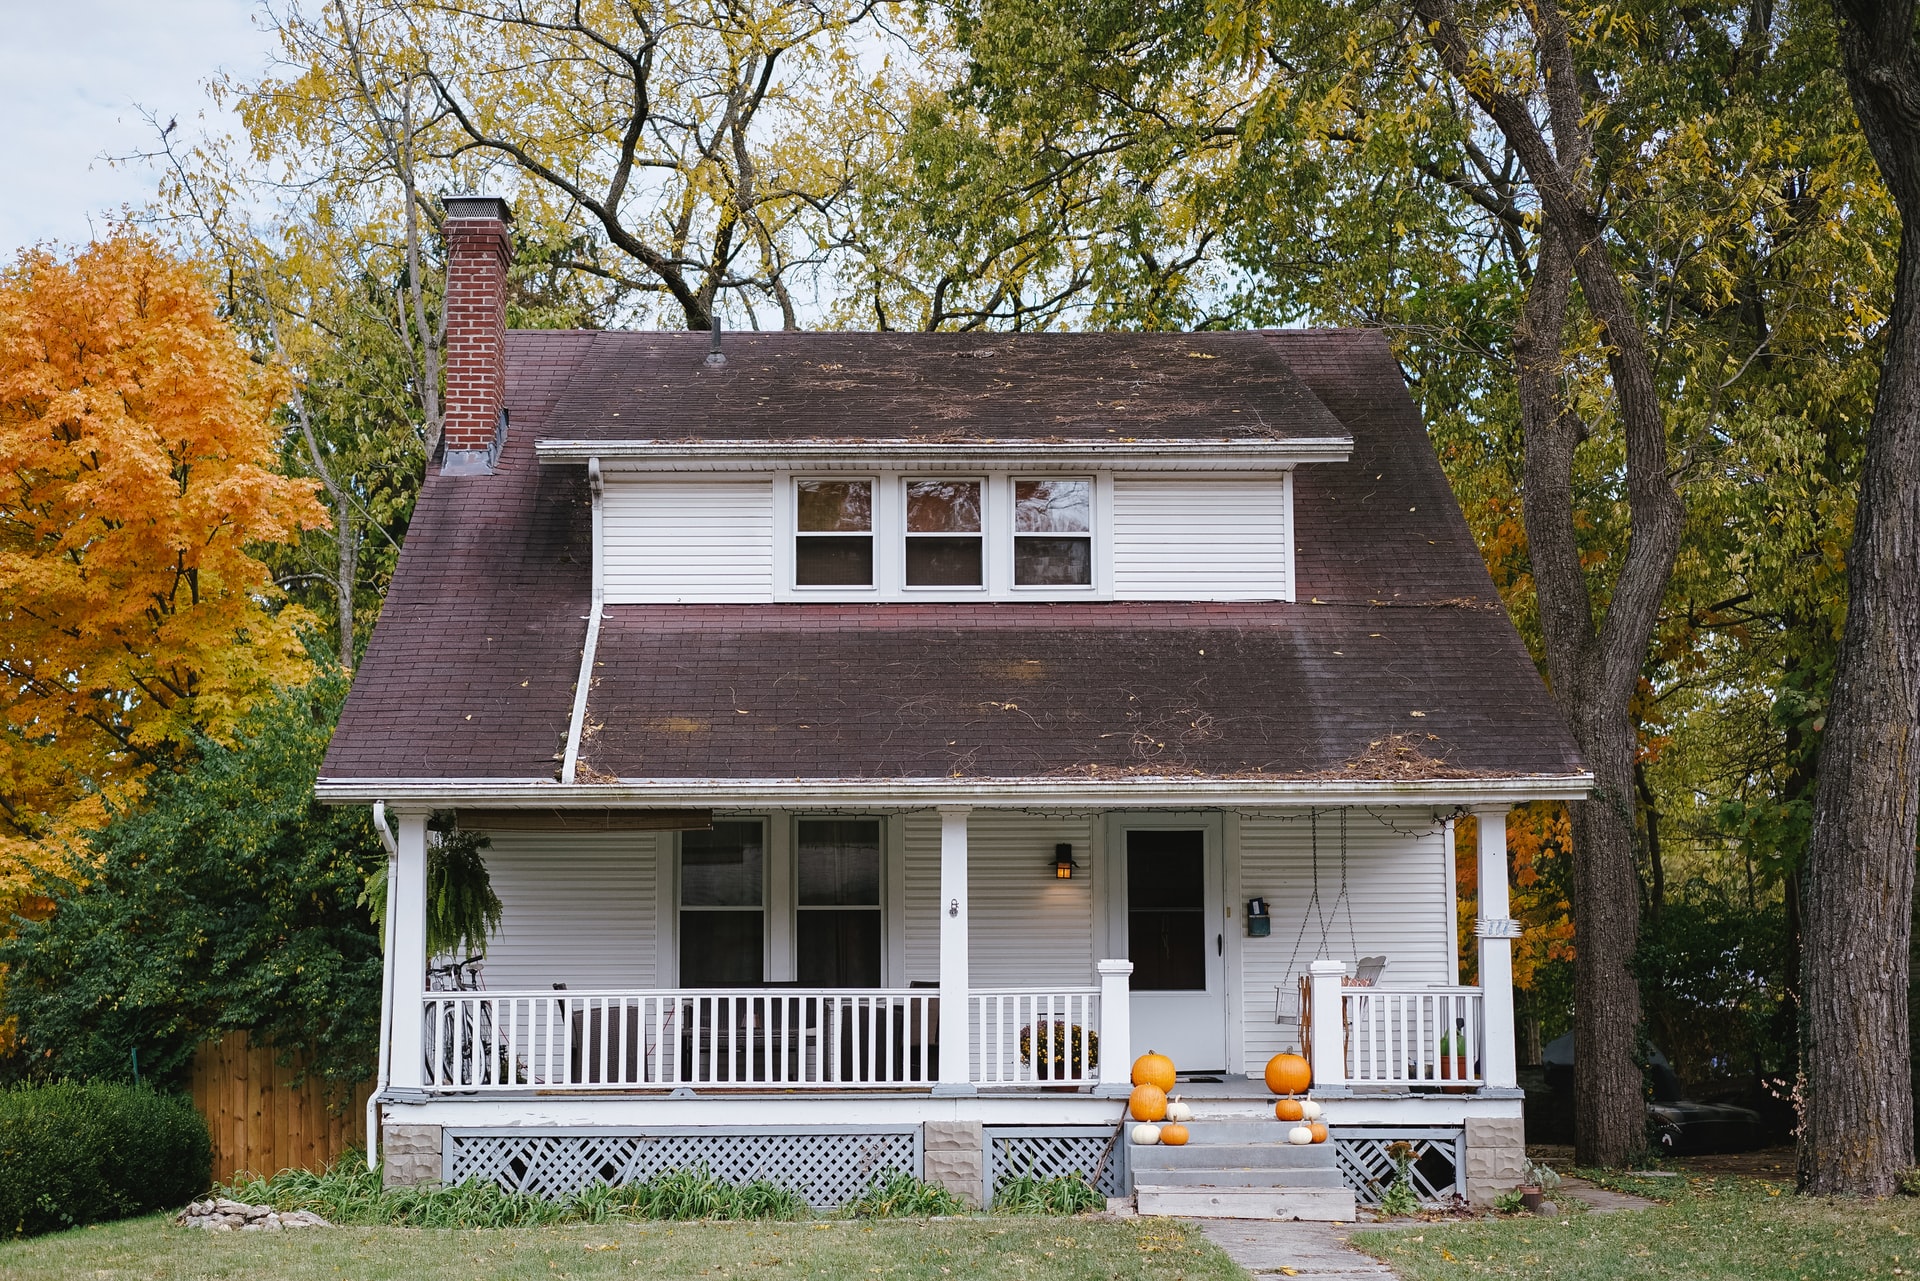 Old House vs. New House: Which Should be Better to Buy?